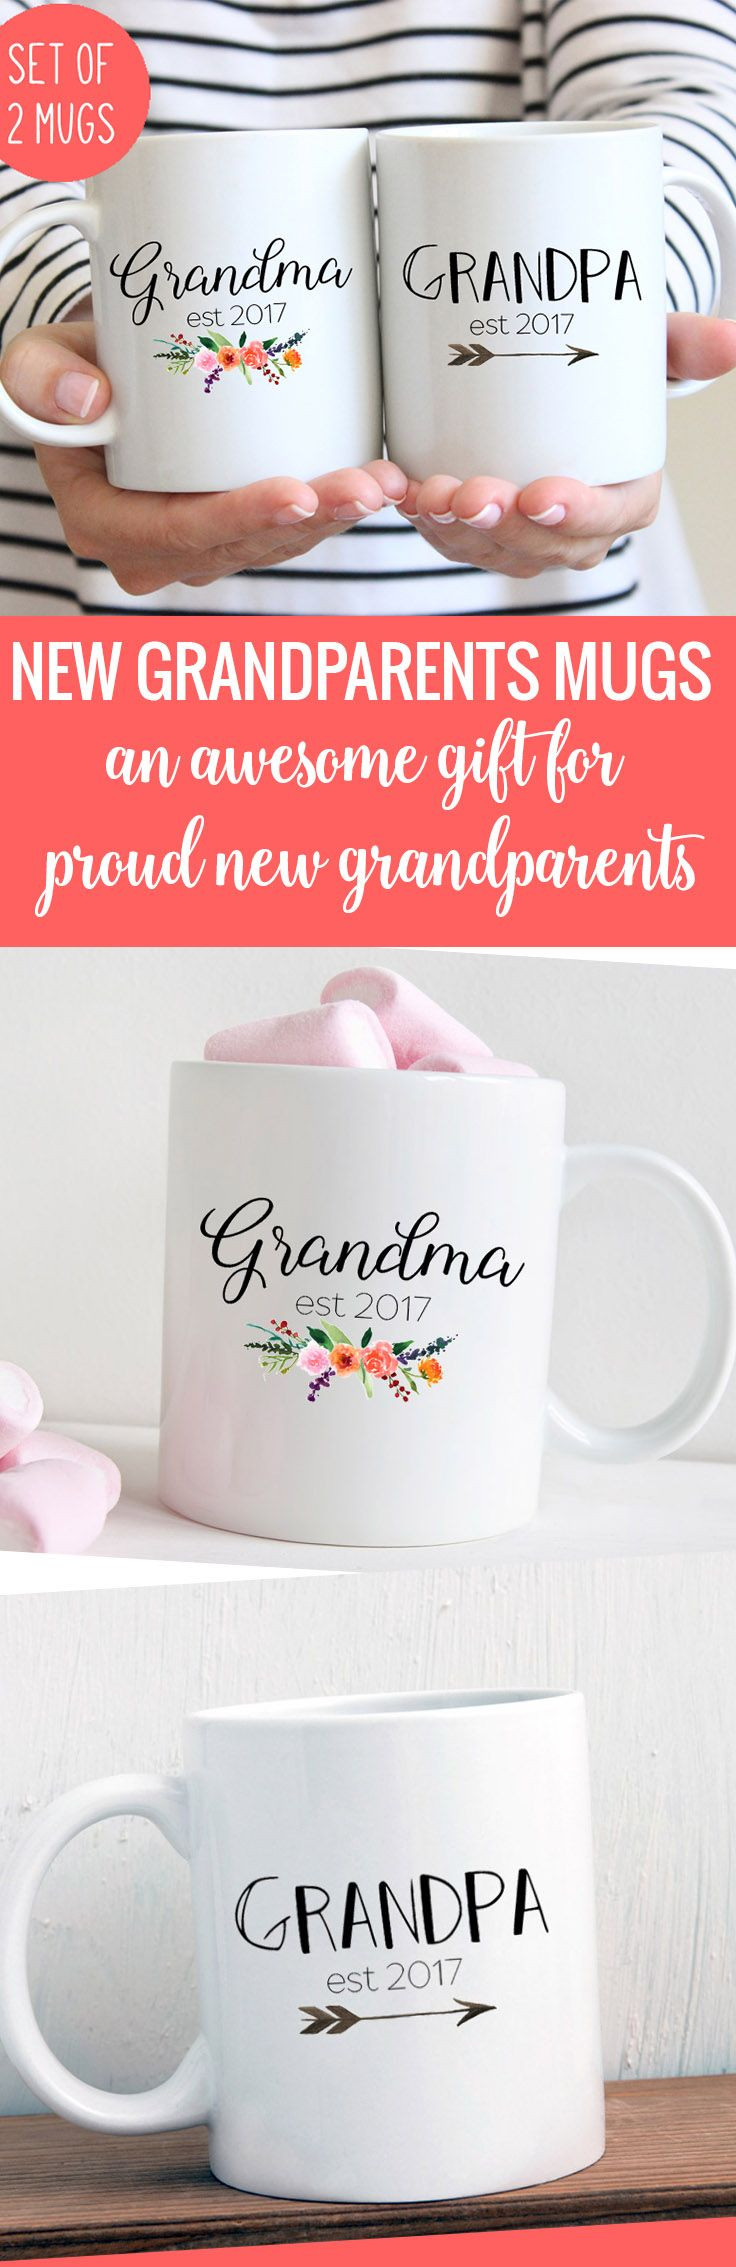 Grandparent Gift Ideas For New Baby
 25 best ideas about New grandparent ts on Pinterest